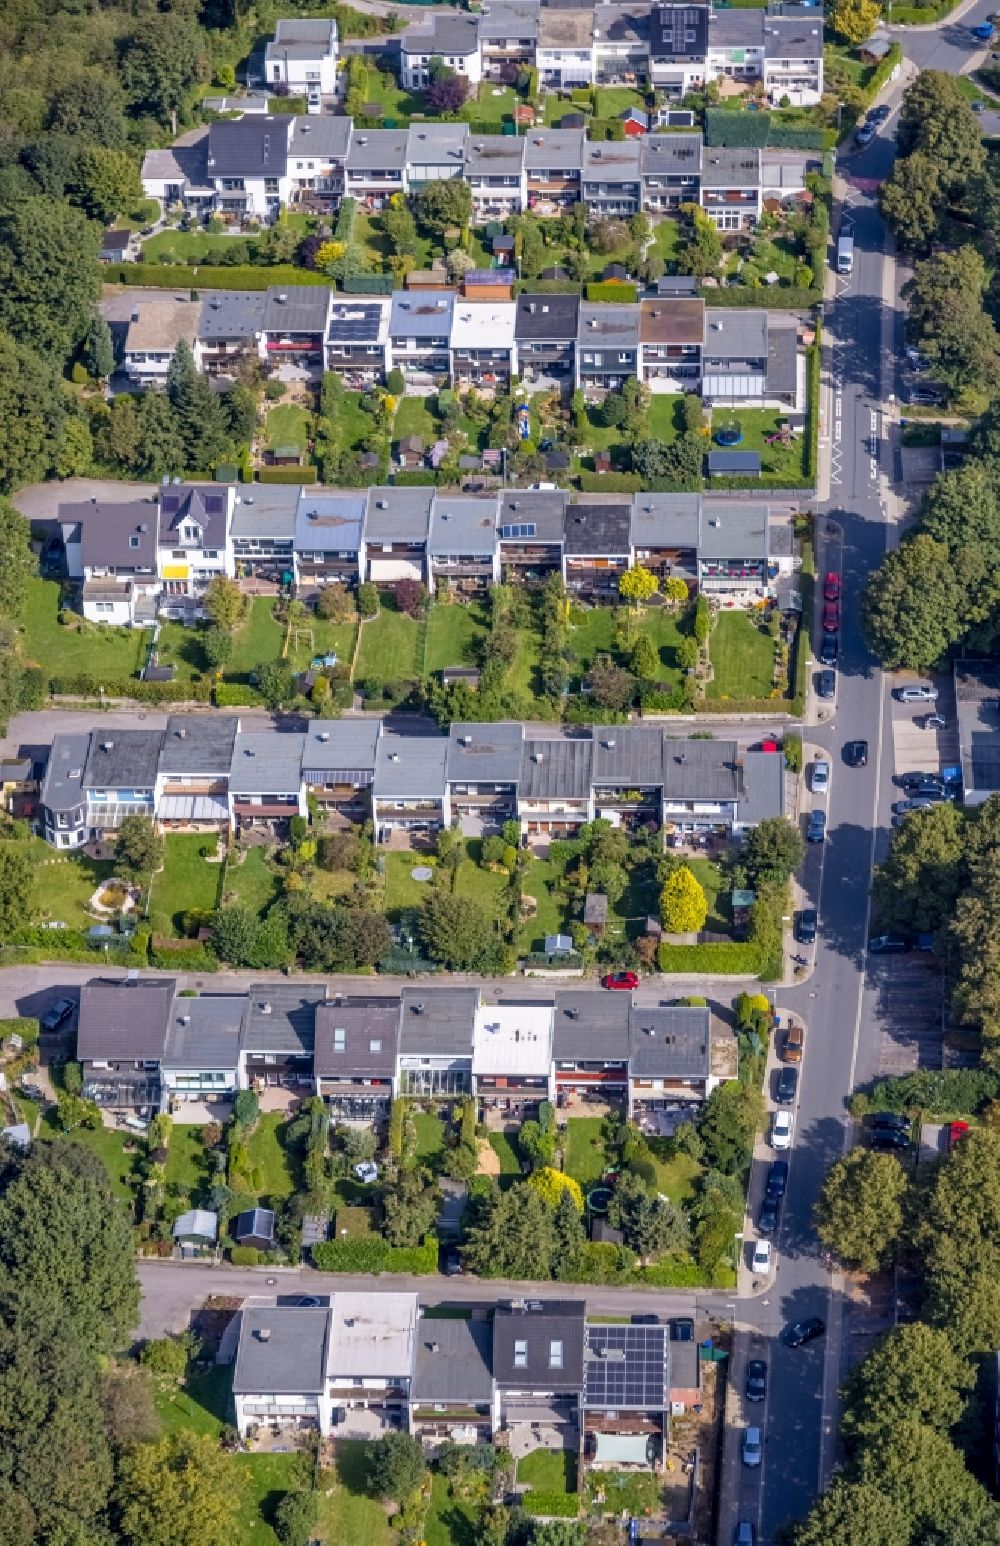 Aerial photograph Oelkinghausen - Residential area - mixed development of a multi-family housing estate and single-family housing estate in Oelkinghausen in the state North Rhine-Westphalia, Germany